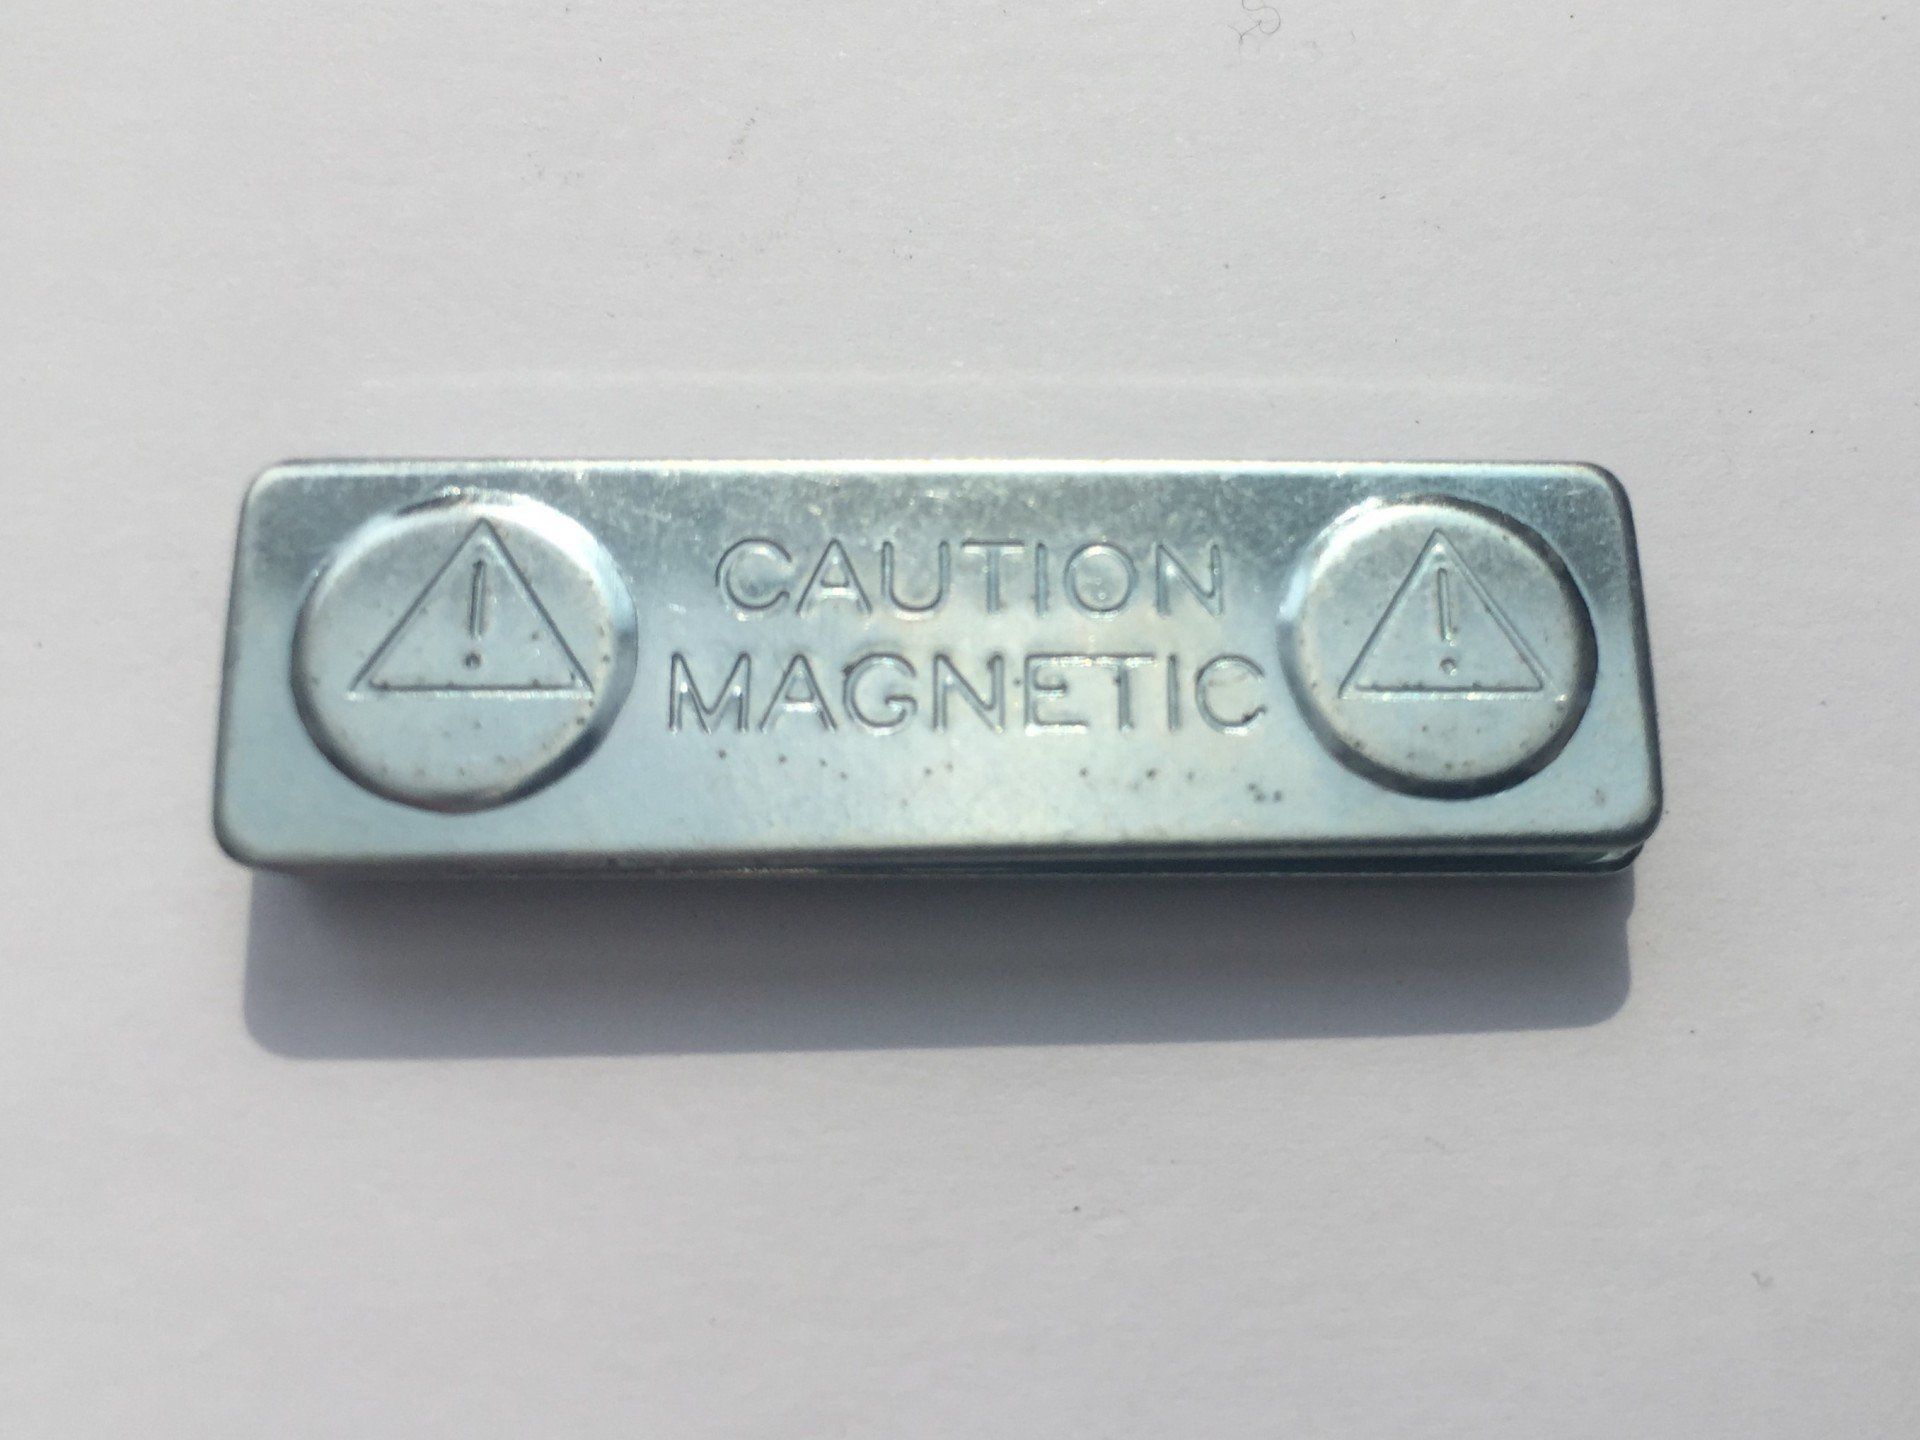 Magnetic fastening for badge